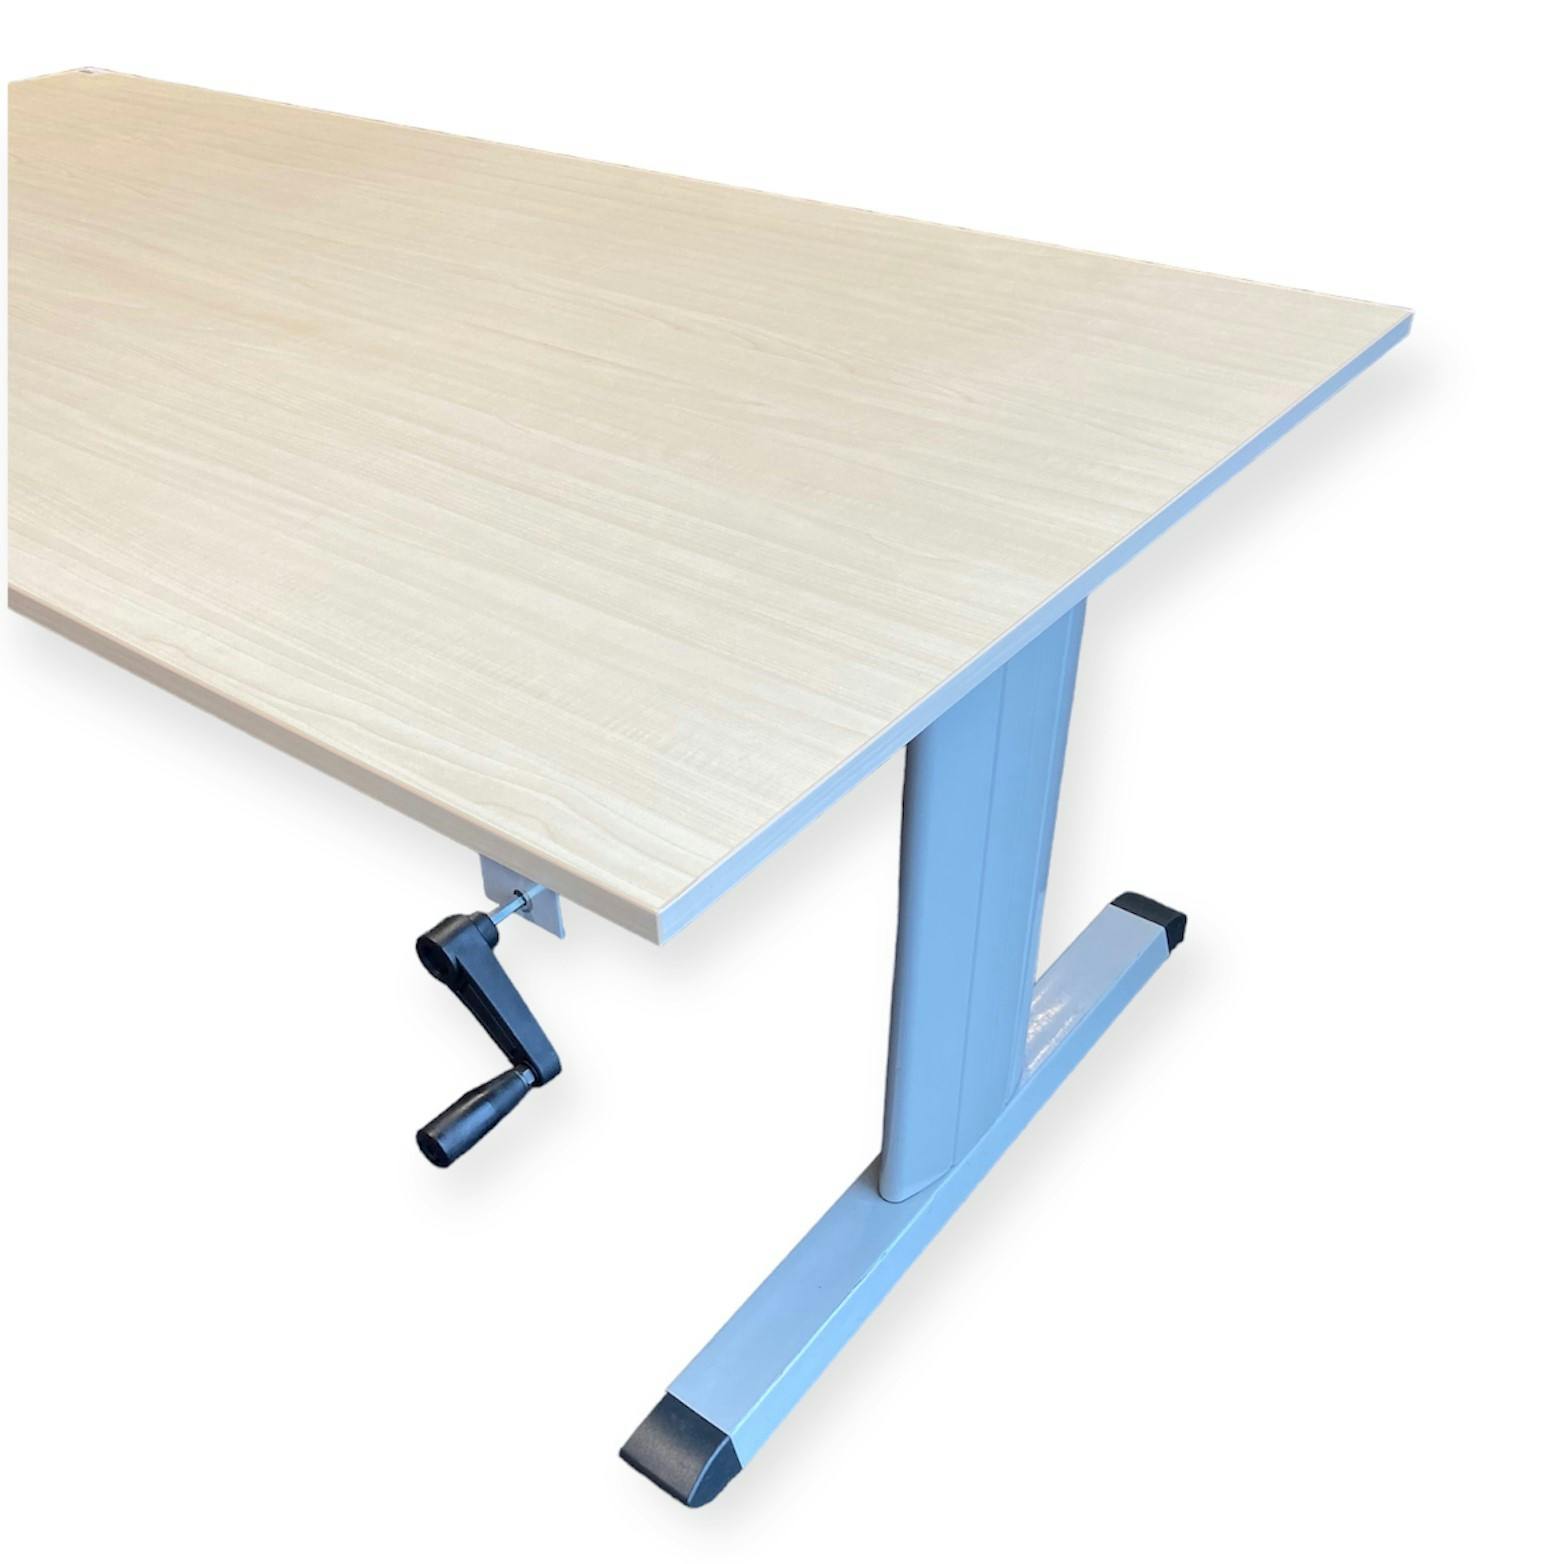 PAMI Wood Print Desks with 2 grey legs (adjustable height) - Second hand quality "Desks" - Relieve Furniture